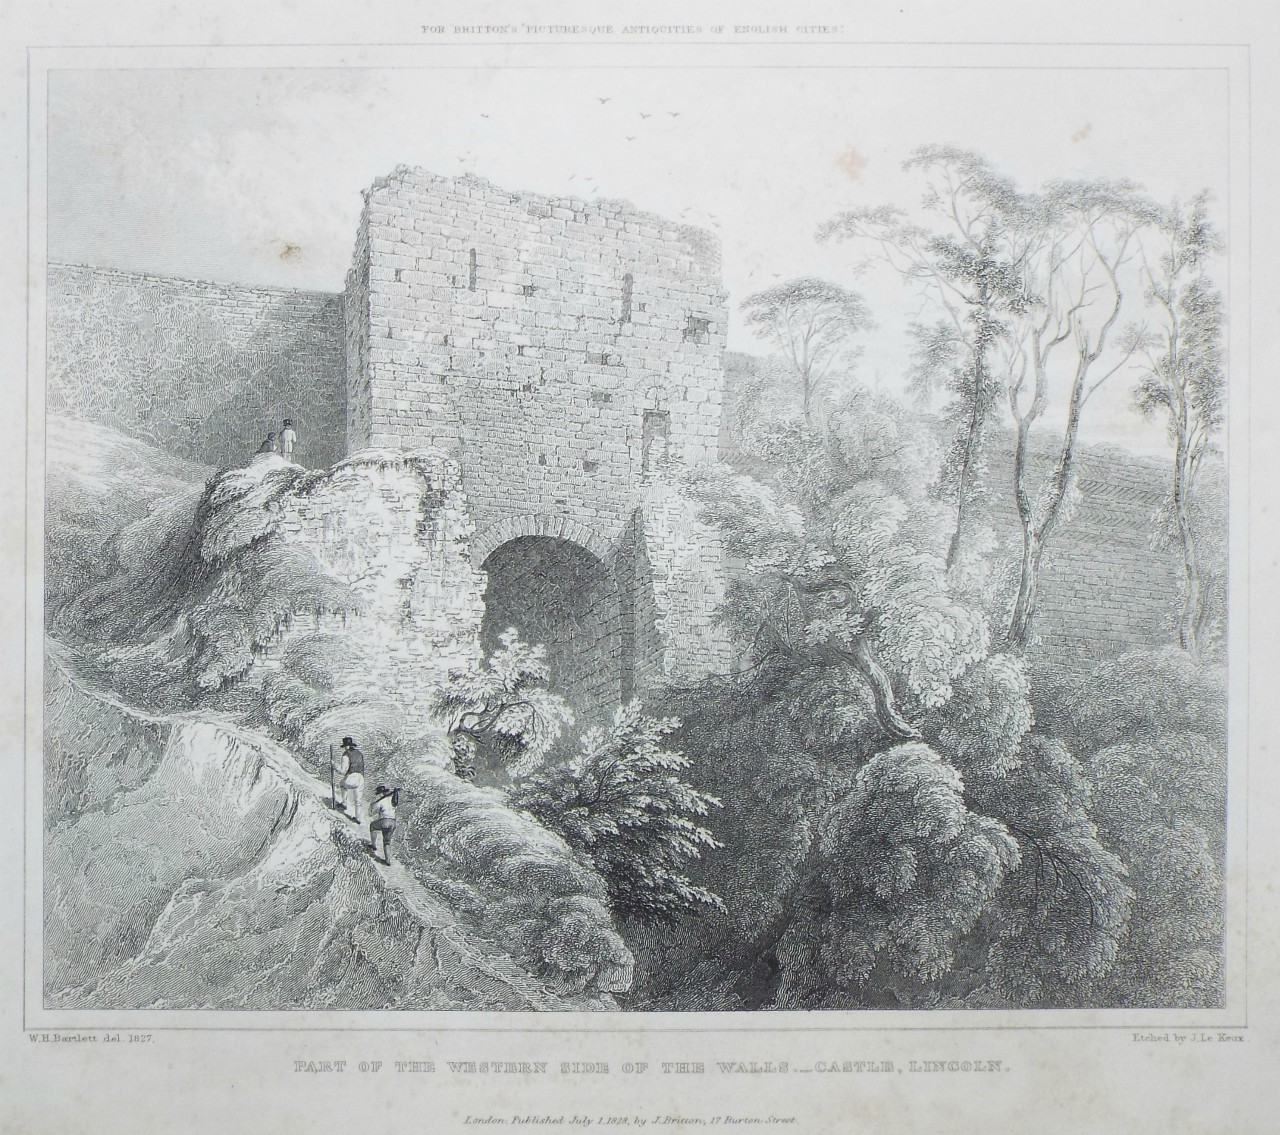 Print - Part of the Western side of the Walls. Castle, Lincoln. - Le